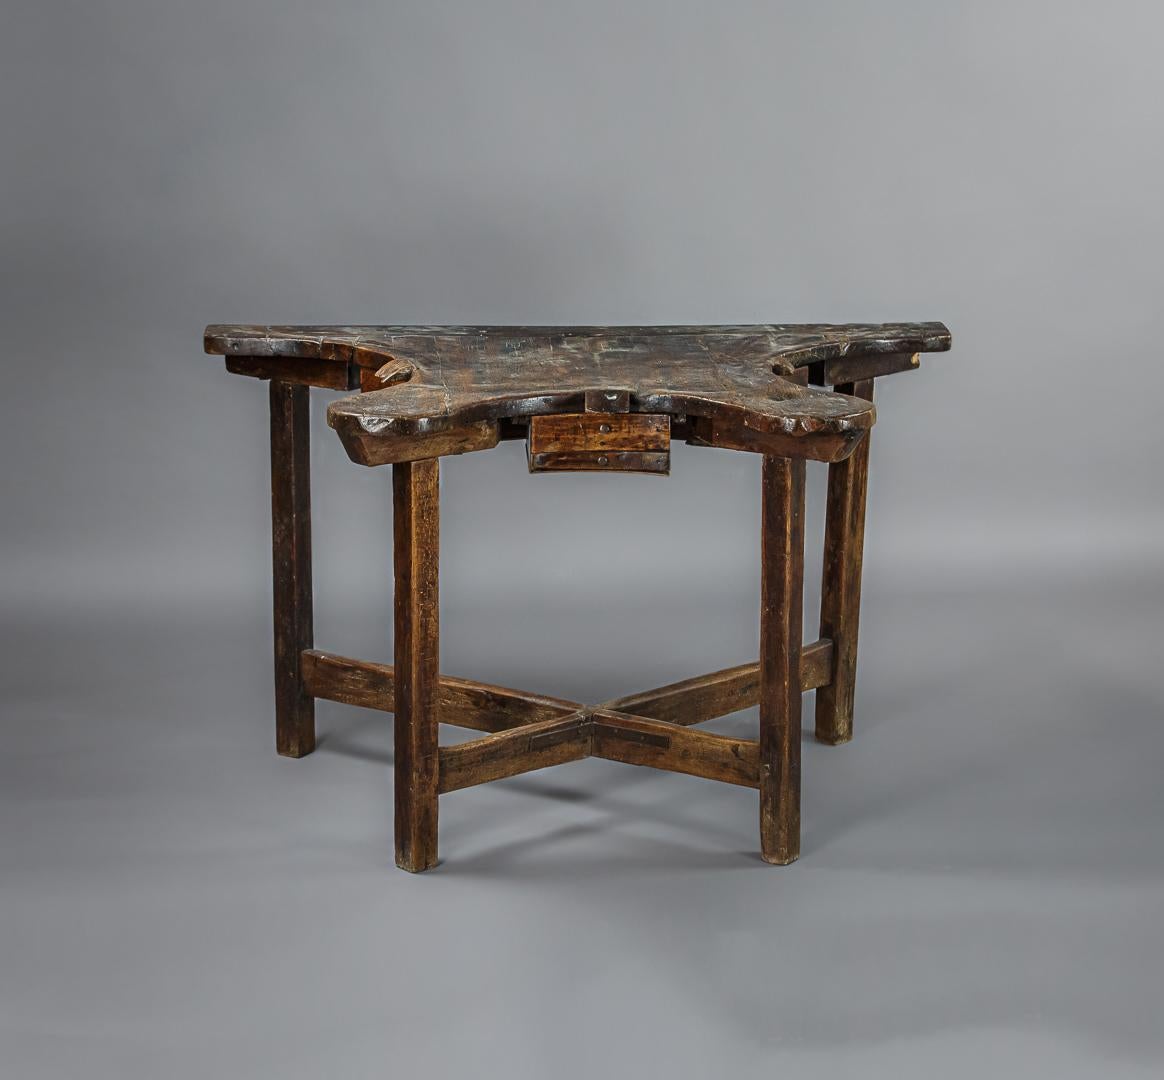 Early 19th century jewelers table, workstation for three craftsmen, each with a small drawer to catch any falling precious metals. Wonderful patina to the fruitwood surface. Makes an unusual home office workstation.
 